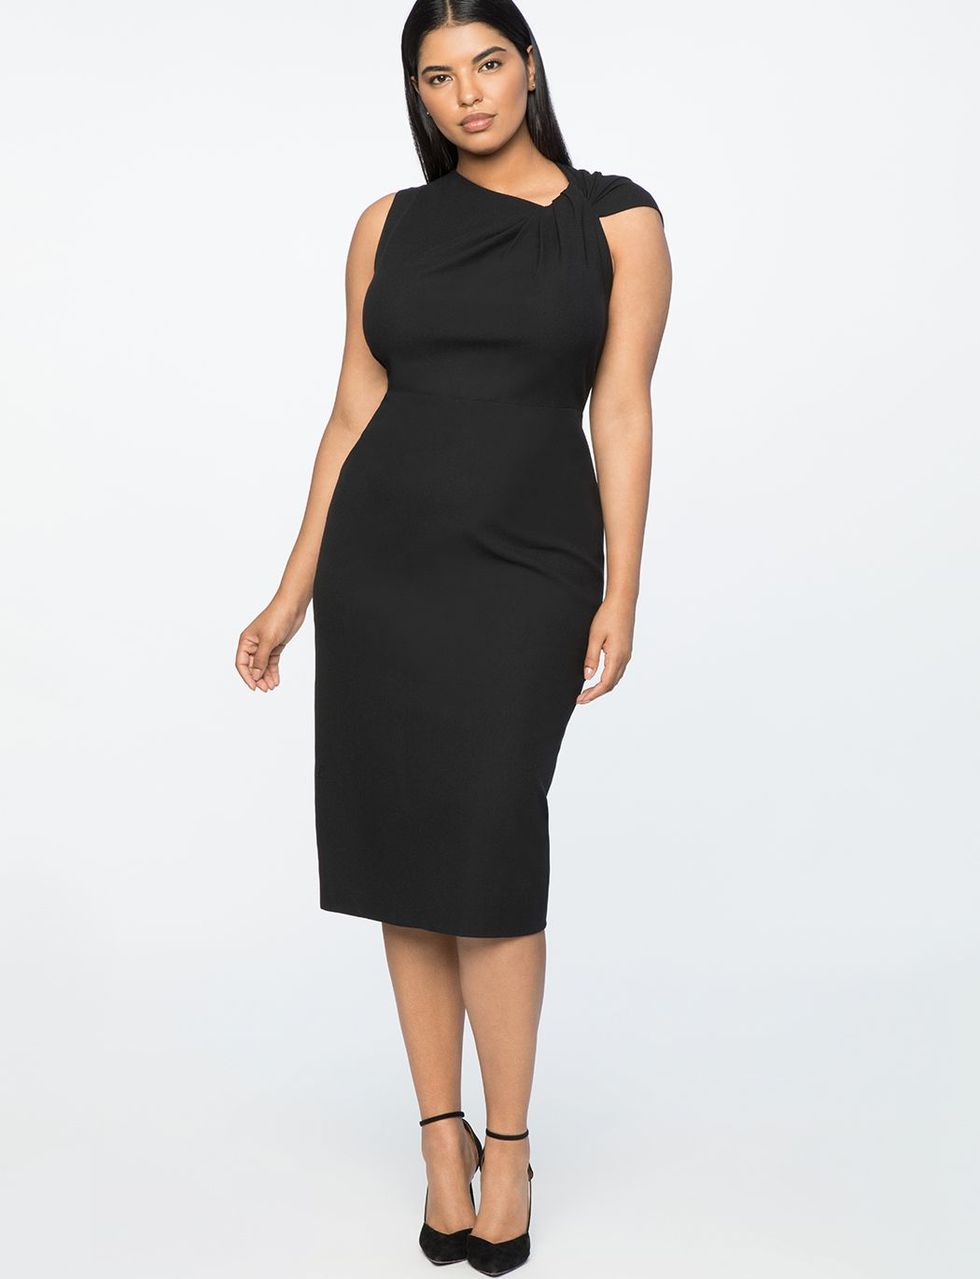 Jason Wu's Plus-Size Collection Is Dropping Just In Time For The